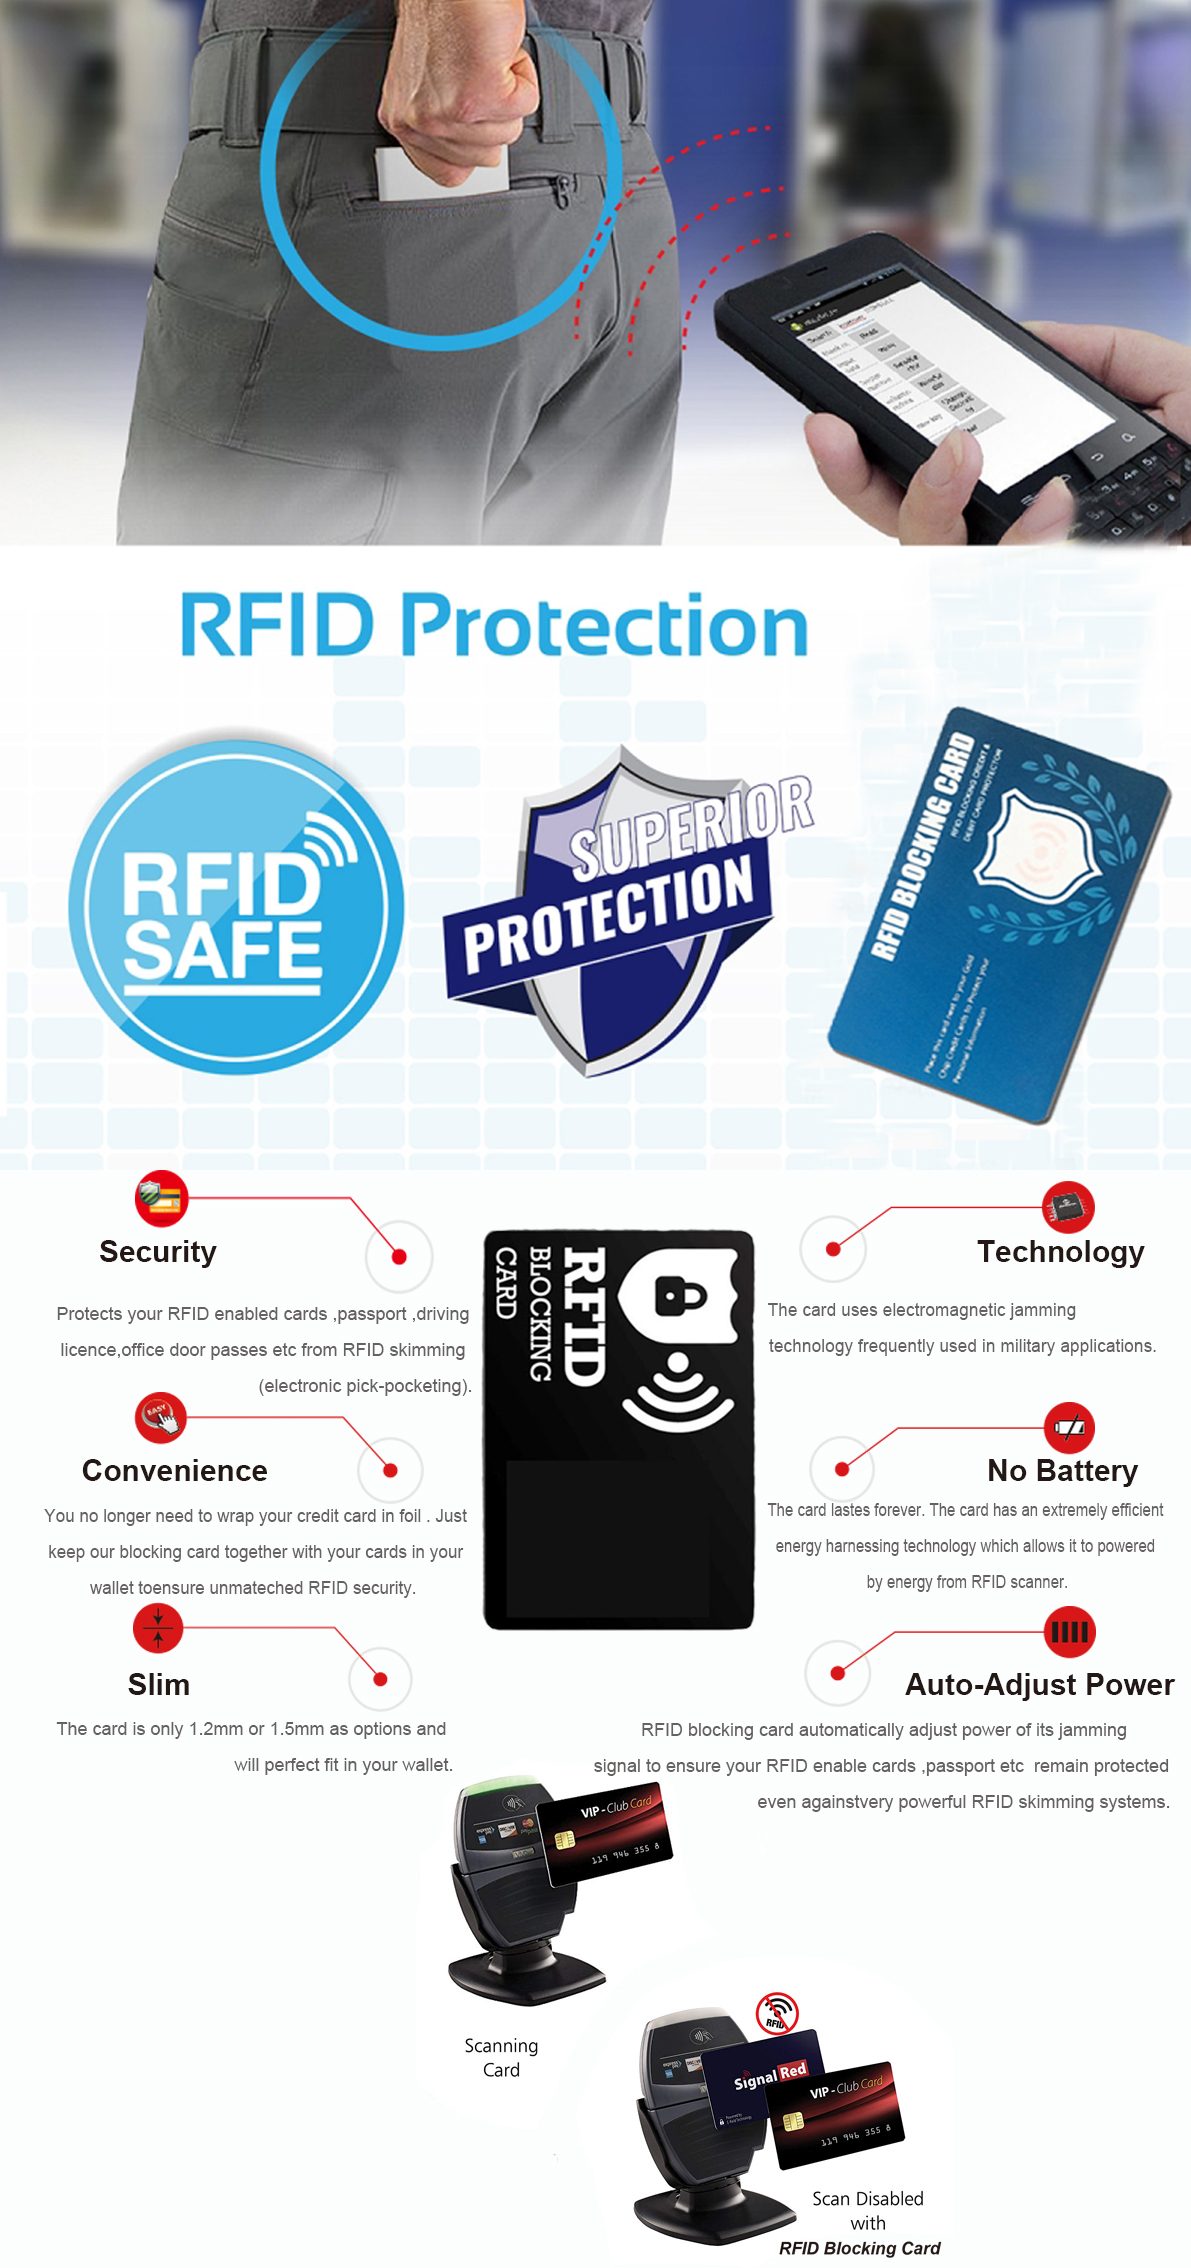 Amazing Protector for Our RFID Bank Card